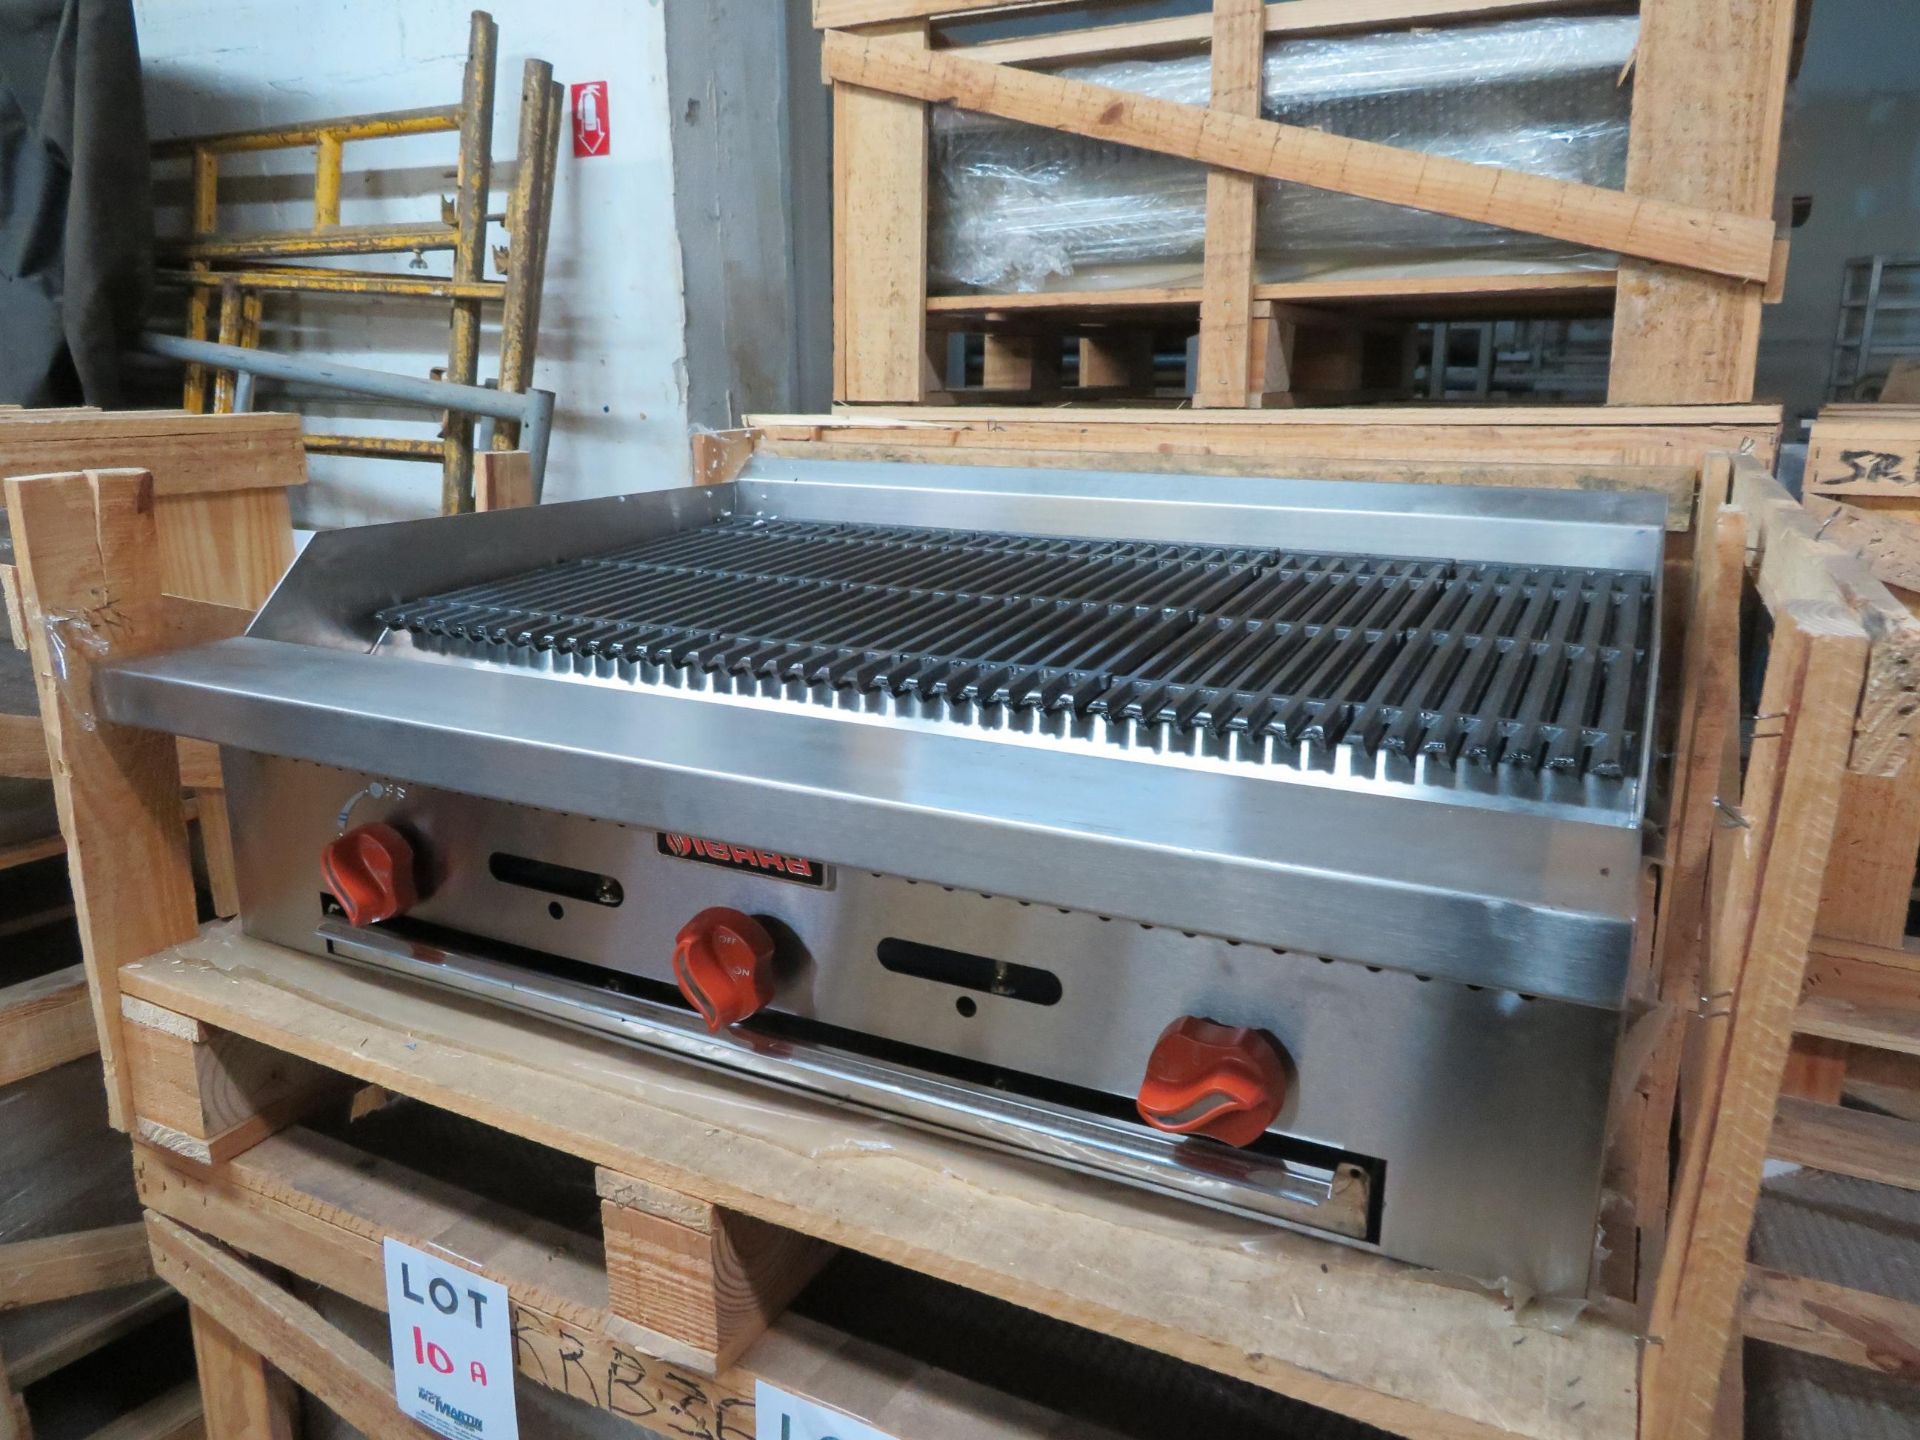 Brand New SIERRA natural gas radiant 36" broiler, Mod #SRRB-36 approx. 36"w x 30"d x 12"h